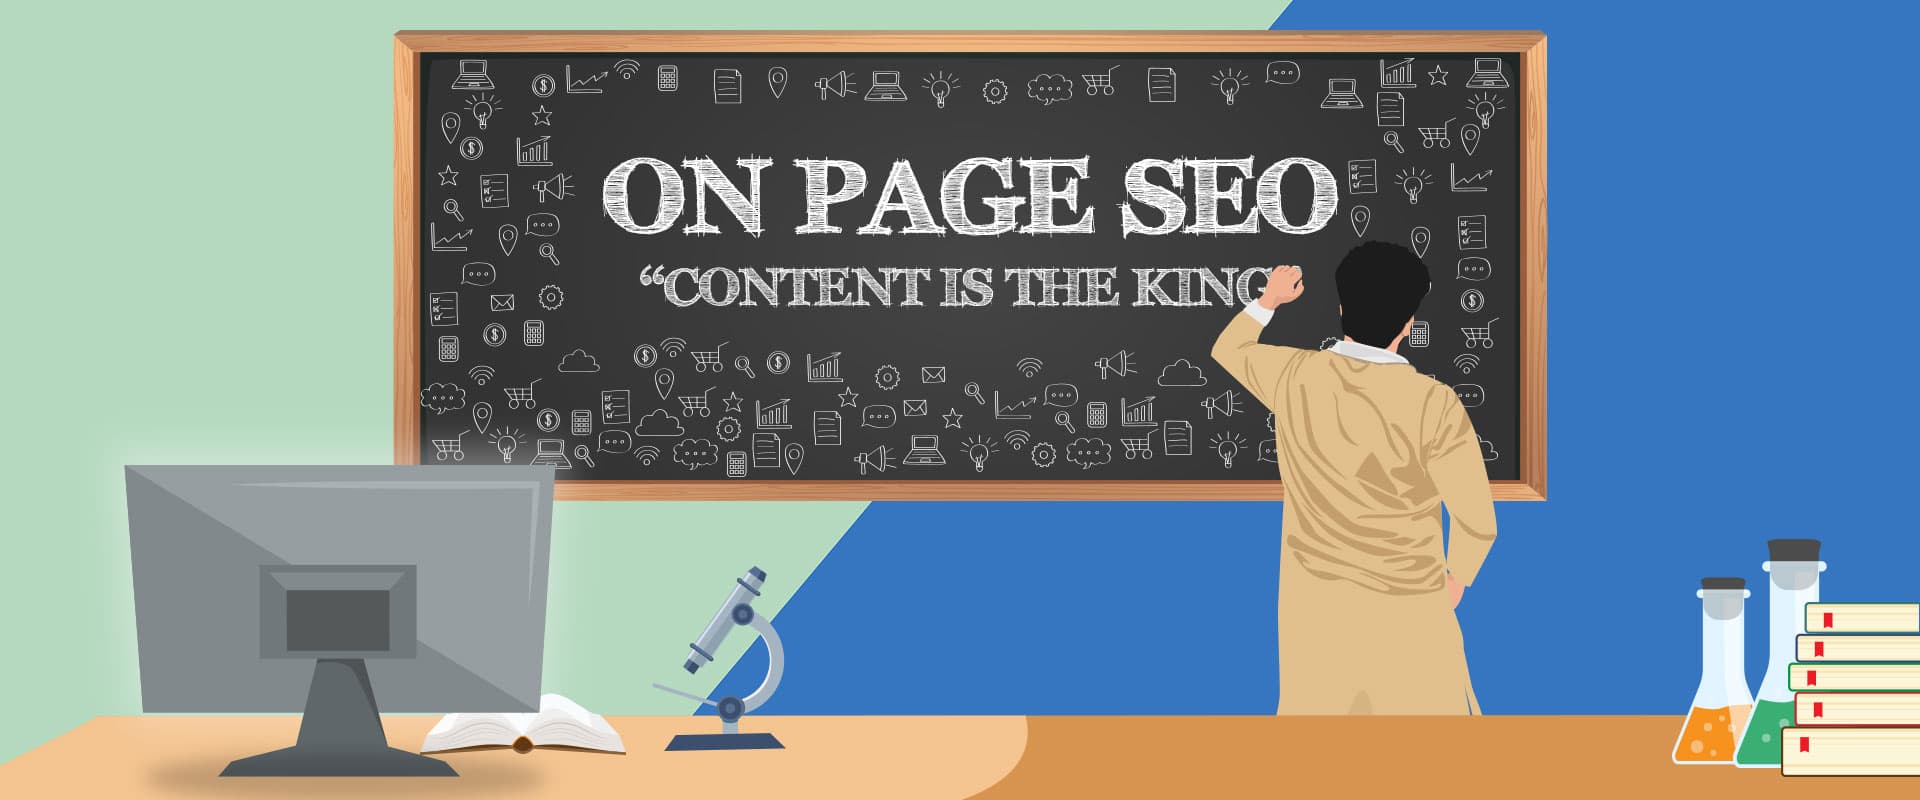 on-opage-seo-what-is-seo-search-engine-optimisation-techniques-complete-guide